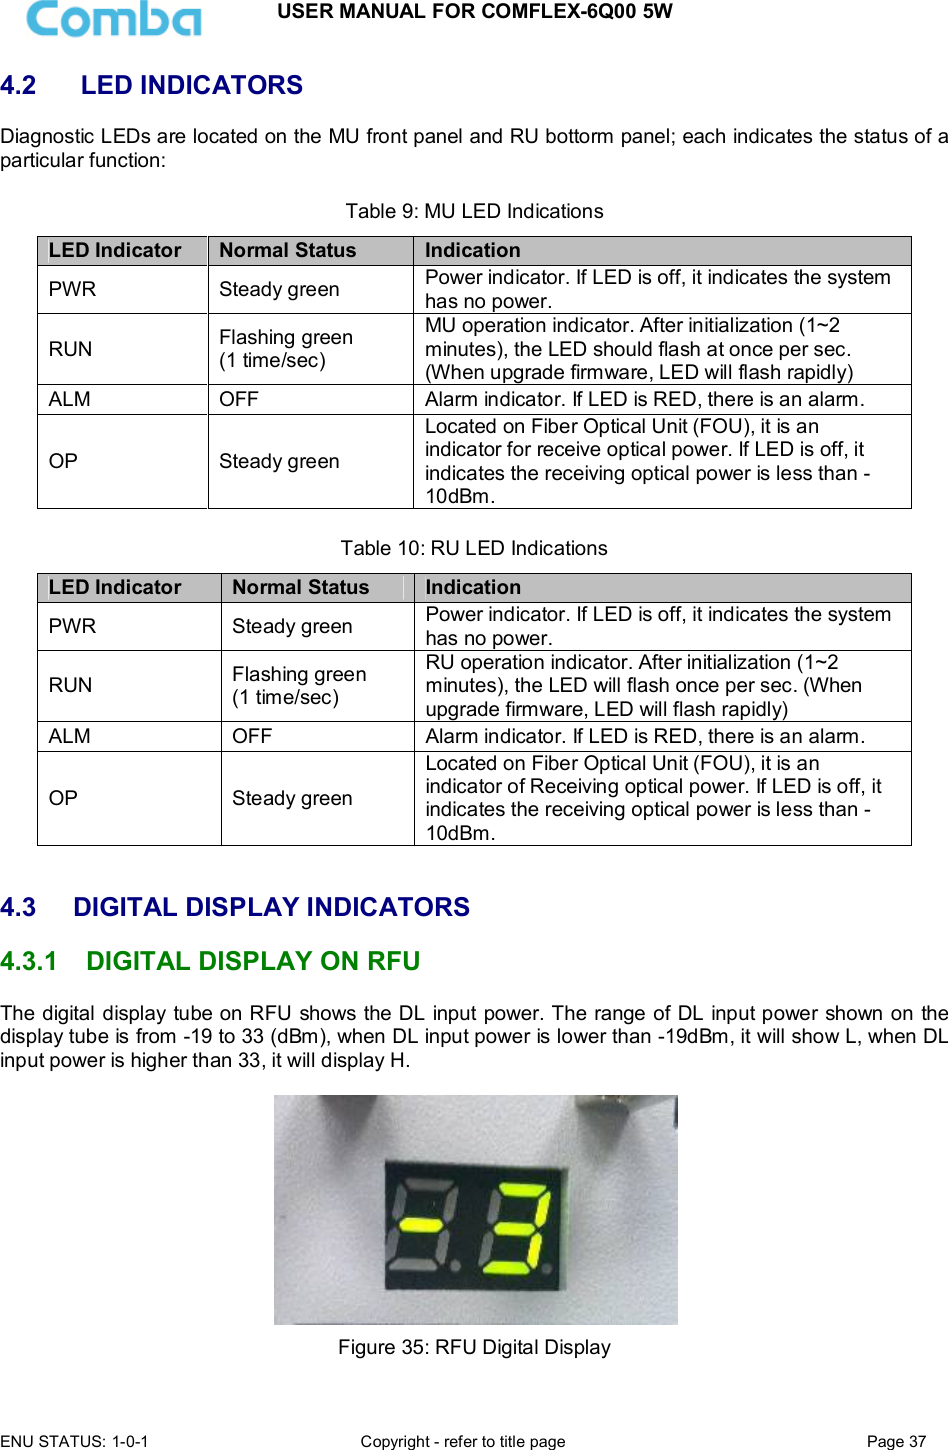 USER MANUAL FOR COMFLEX-6Q00 5W  ENU STATUS: 1-0-1  Copyright - refer to title page  Page 37      4.2   LED INDICATORS Diagnostic LEDs are located on the MU front panel and RU bottorm panel; each indicates the status of a particular function:  Table 9: MU LED Indications LED Indicator  Normal Status  Indication PWR  Steady green Power indicator. If LED is off, it indicates the system has no power.  RUN  Flashing green (1 time/sec) MU operation indicator. After initialization (1~2 minutes), the LED should flash at once per sec. (When upgrade firmware, LED will flash rapidly)  ALM  OFF  Alarm indicator. If LED is RED, there is an alarm. OP  Steady green Located on Fiber Optical Unit (FOU), it is an indicator for receive optical power. If LED is off, it indicates the receiving optical power is less than -10dBm.  Table 10: RU LED Indications LED Indicator  Normal Status  Indication PWR  Steady green Power indicator. If LED is off, it indicates the system has no power. RUN  Flashing green (1 time/sec) RU operation indicator. After initialization (1~2 minutes), the LED will flash once per sec. (When upgrade firmware, LED will flash rapidly) ALM  OFF  Alarm indicator. If LED is RED, there is an alarm. OP  Steady green Located on Fiber Optical Unit (FOU), it is an indicator of Receiving optical power. If LED is off, it indicates the receiving optical power is less than -10dBm.   4.3  DIGITAL DISPLAY INDICATORS 4.3.1  DIGITAL DISPLAY ON RFU The digital display tube on RFU shows the DL input power. The range of DL input power shown on the display tube is from -19 to 33 (dBm), when DL input power is lower than -19dBm, it will show L, when DL input power is higher than 33, it will display H.    Figure 35: RFU Digital Display  